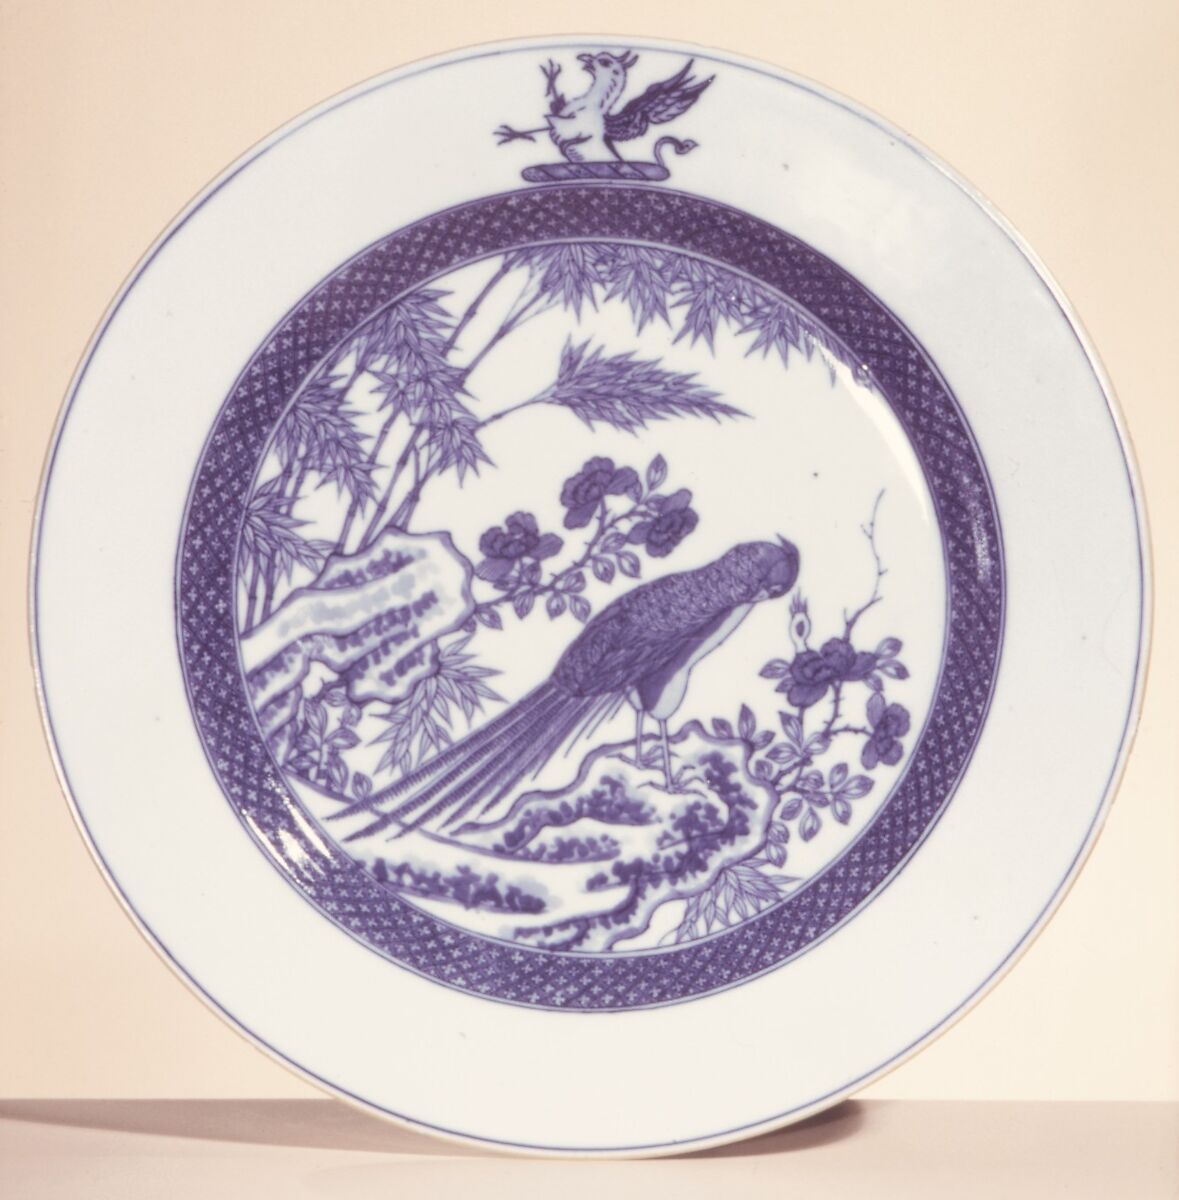 Plate (one of a pair), Hard-paste porcelain, Chinese, for British market 